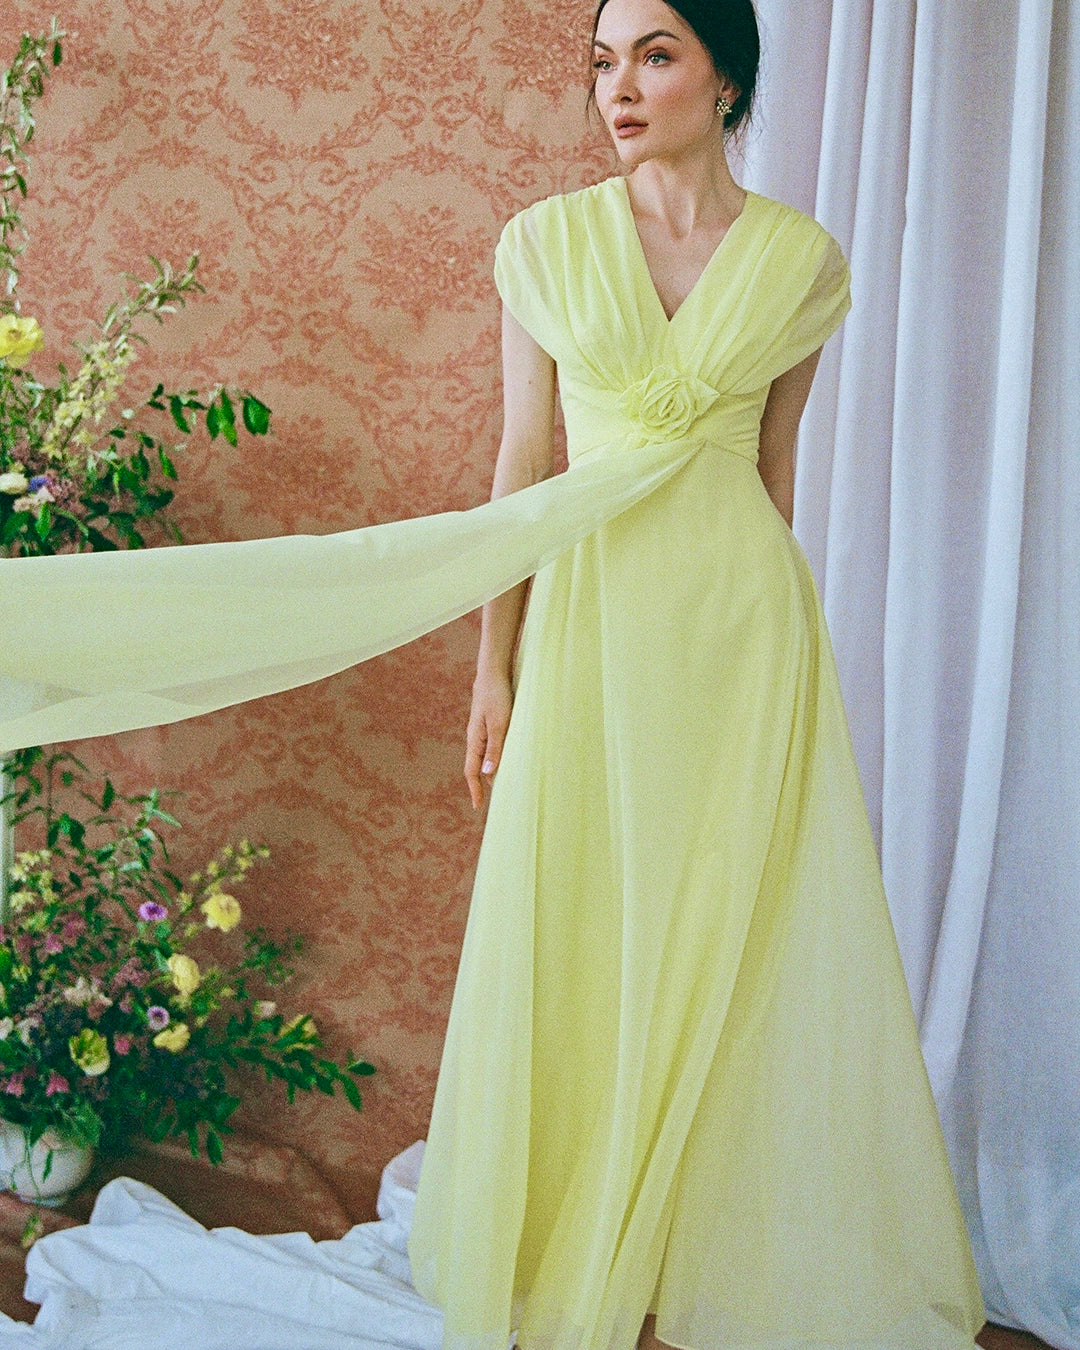 VINTAGE 1960s YELLOW TULLE ROSETTE GOWN